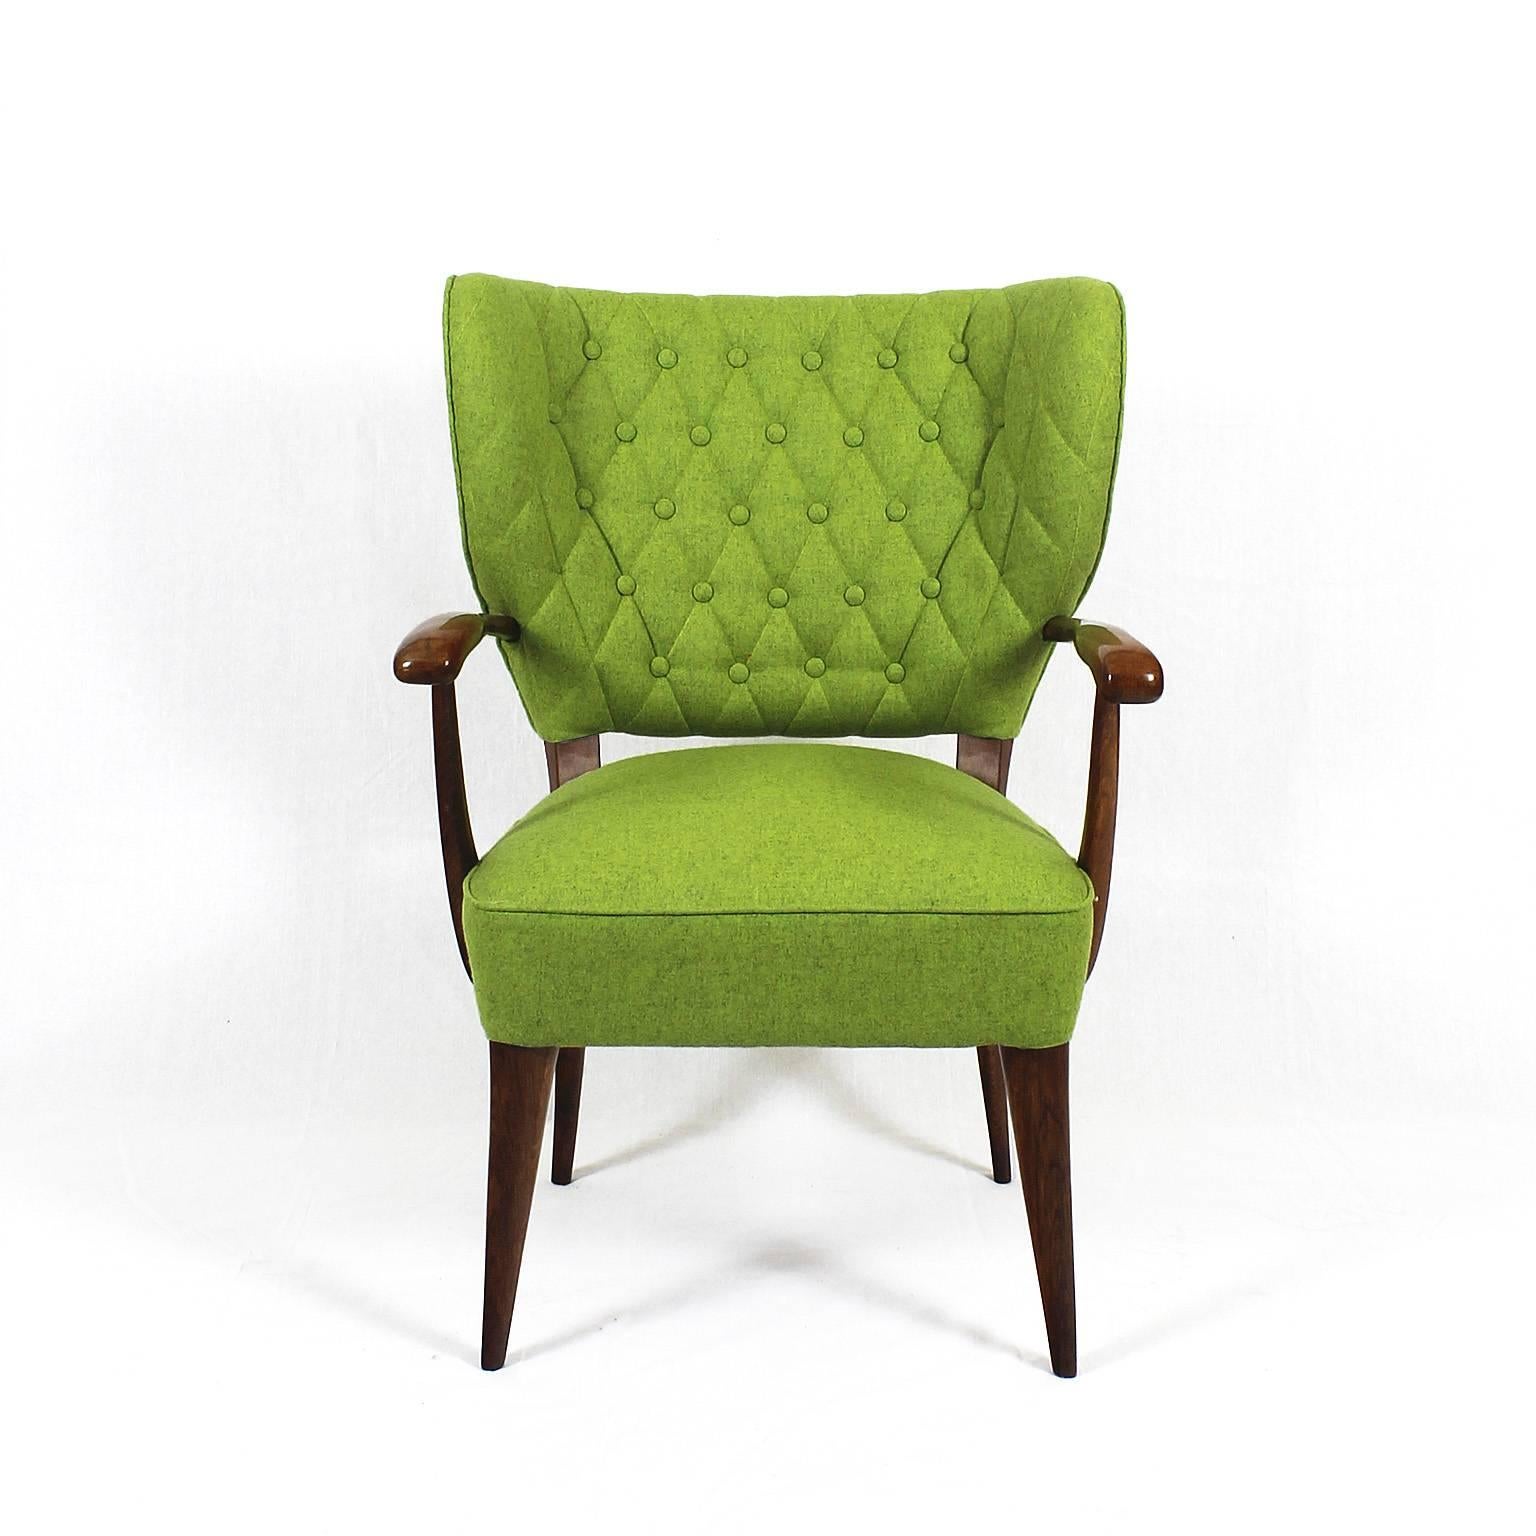 Pair of small armchairs, oakwood, French polish, new upholstery and tufted back in anise green wool,

France, circa 1940.